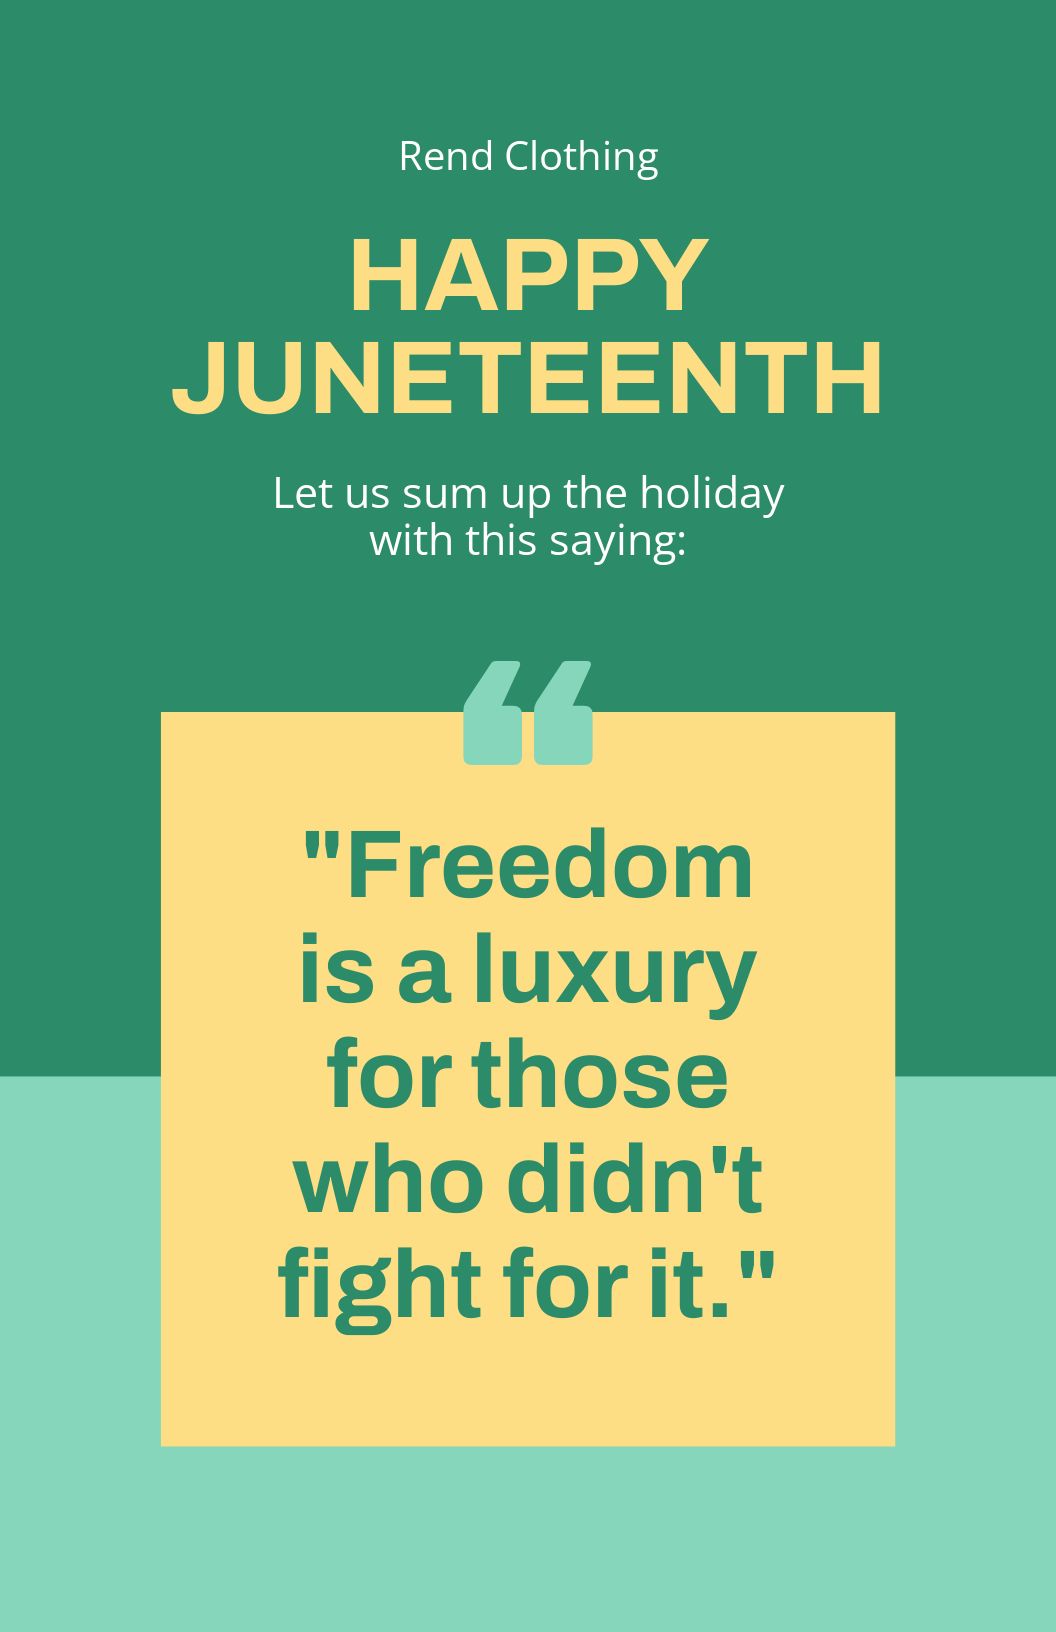 Juneteenth Saying Poster in Word, Google Docs, Illustrator, PSD, Apple Pages, Publisher, JPG